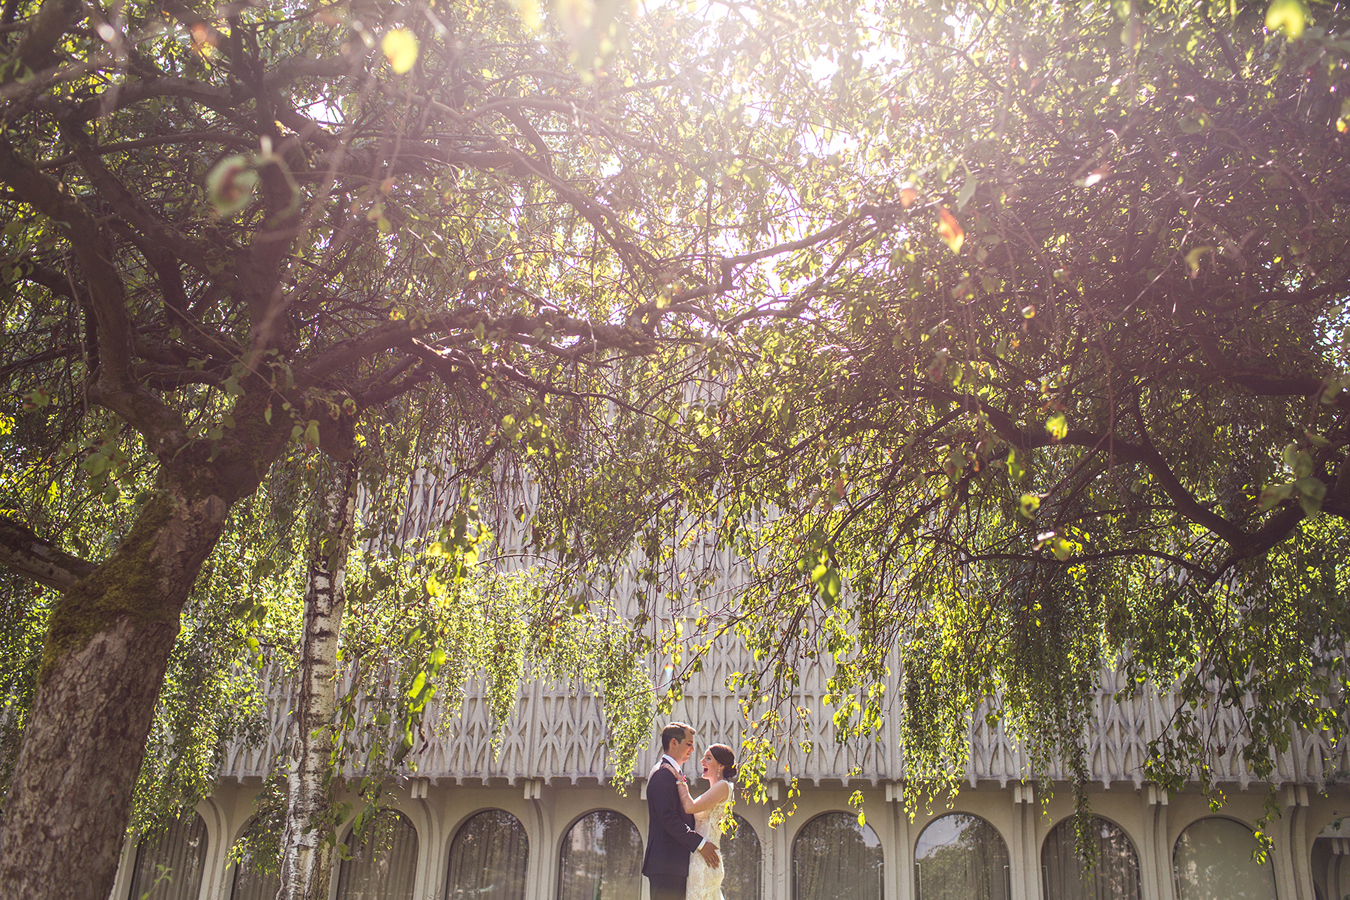 newlyweds share a moment of joy underneath willow trees at Vanier Park in Vancouver BC